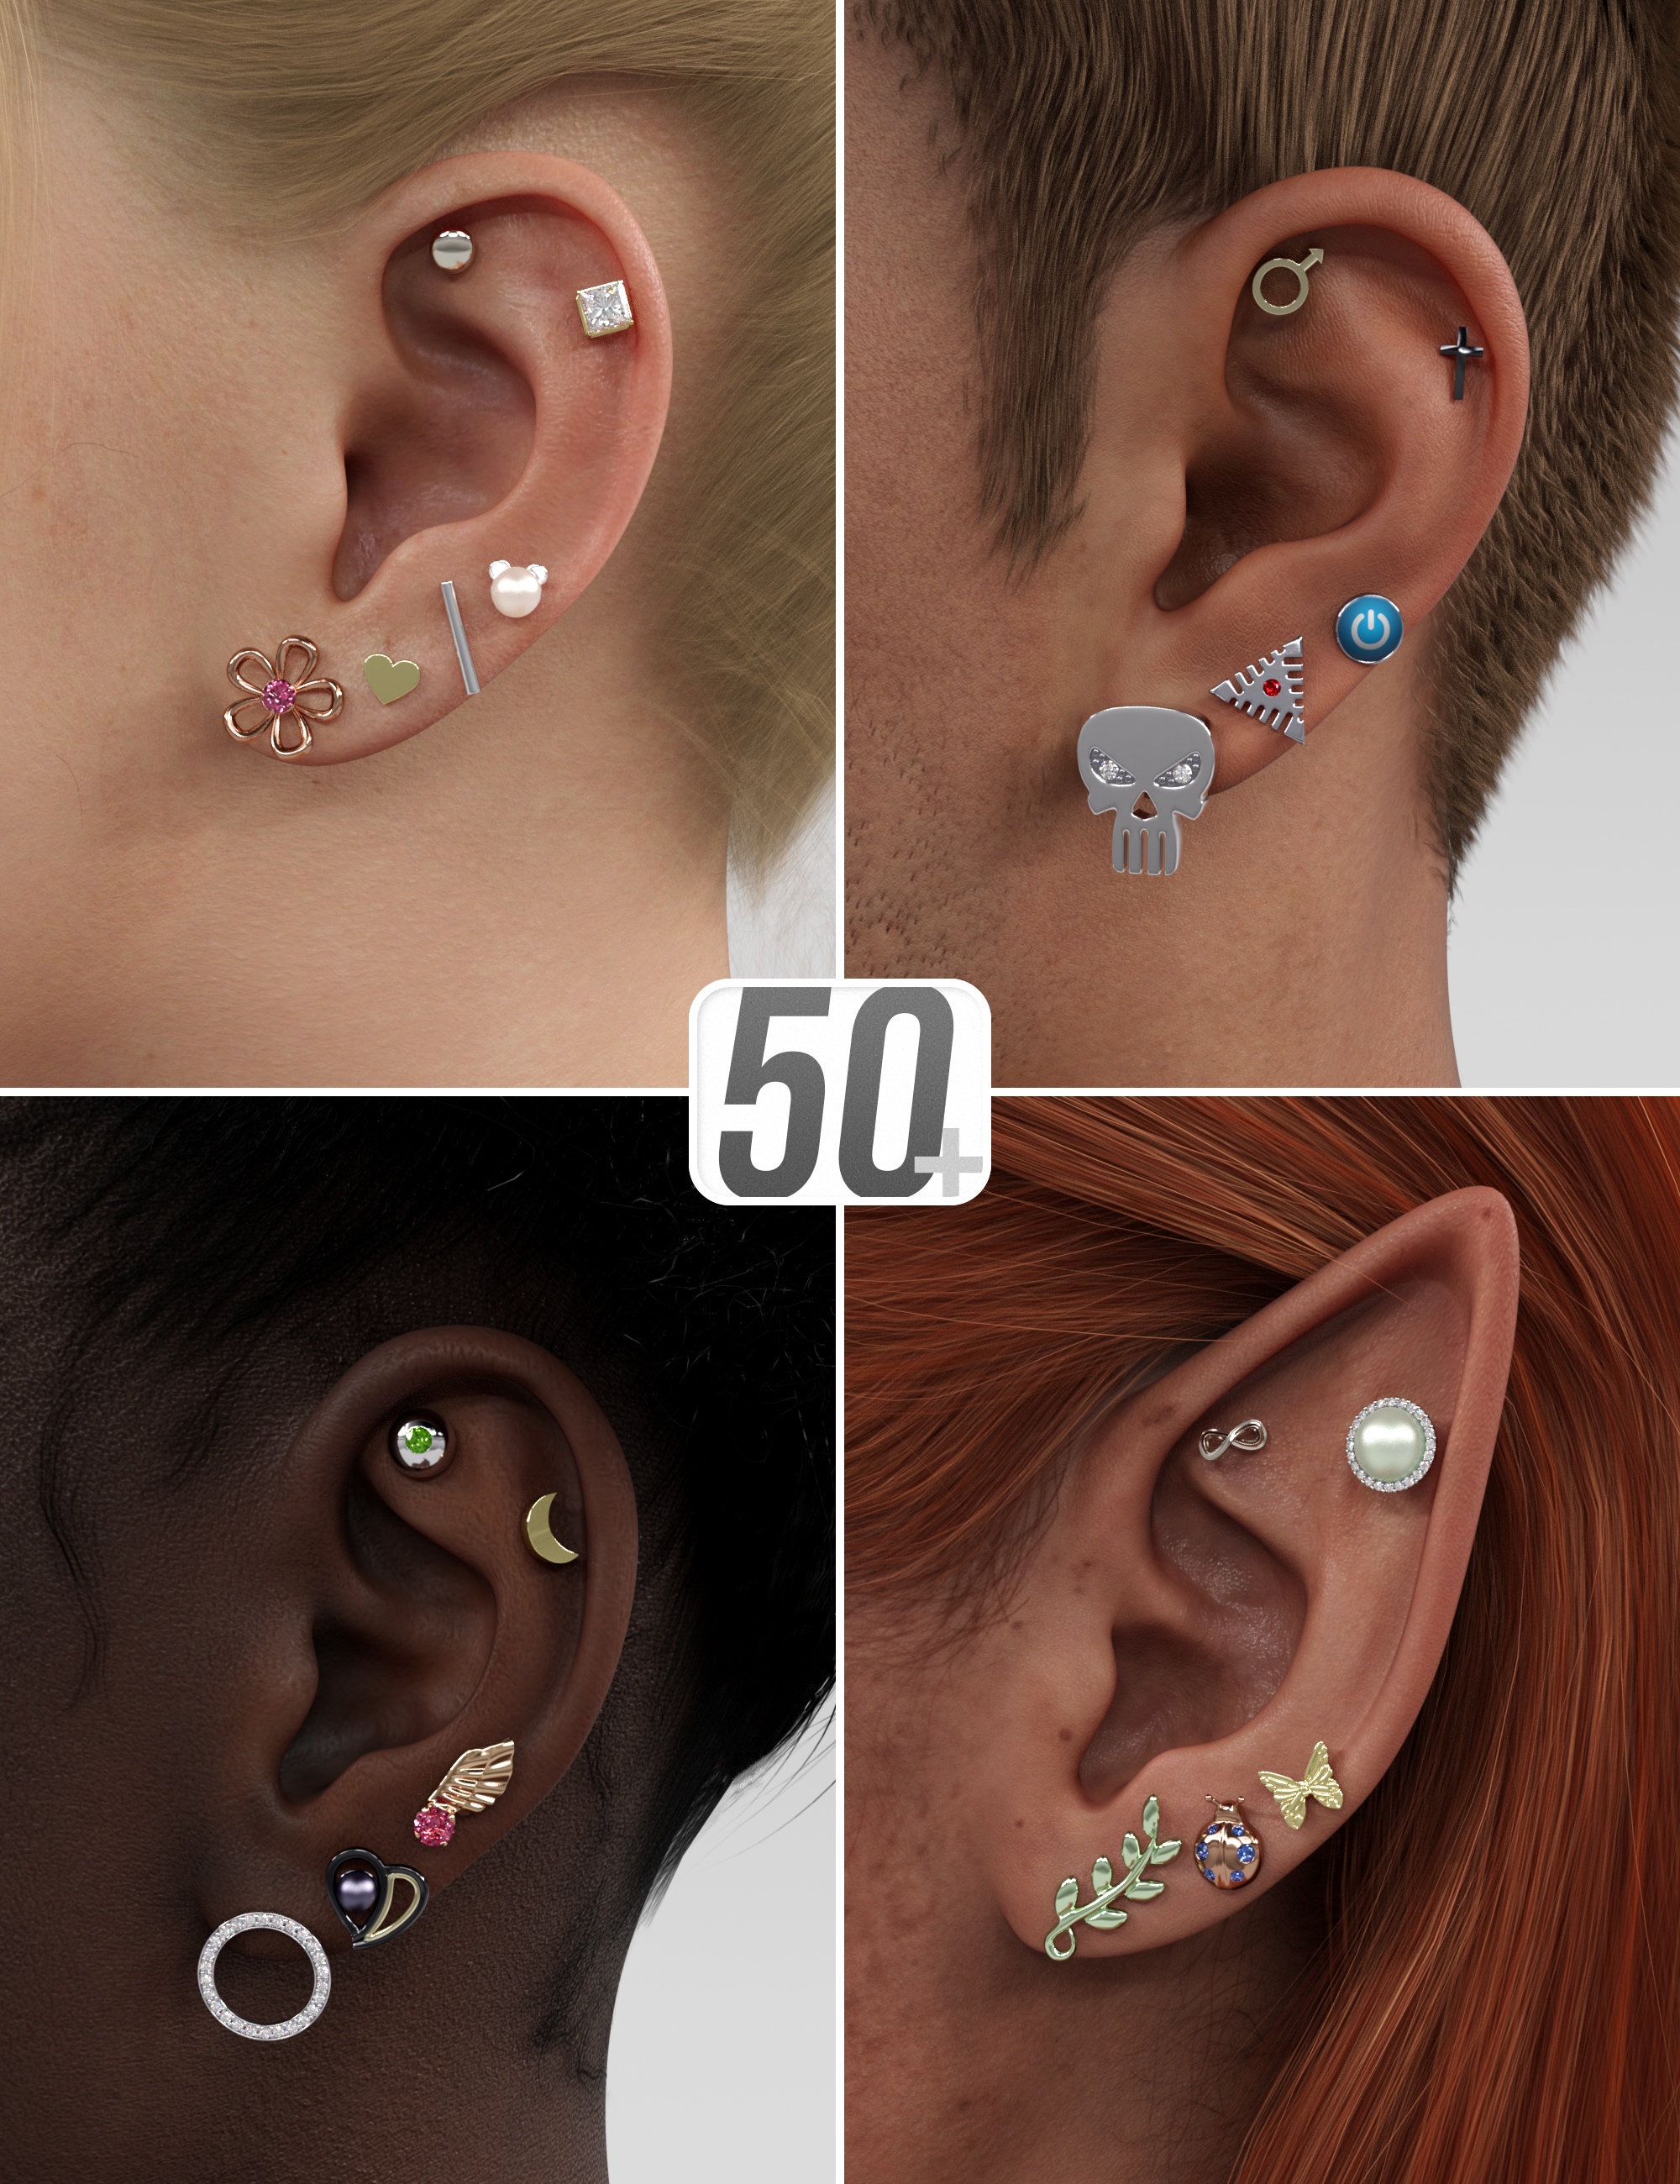 Buy Chain Linked Earrings Flower Studs for Multiple Piercings, Cartilage  and Helix Piercings. in Gold, Silver or Rose Gold. Chain Earrings. Online  in India - Etsy